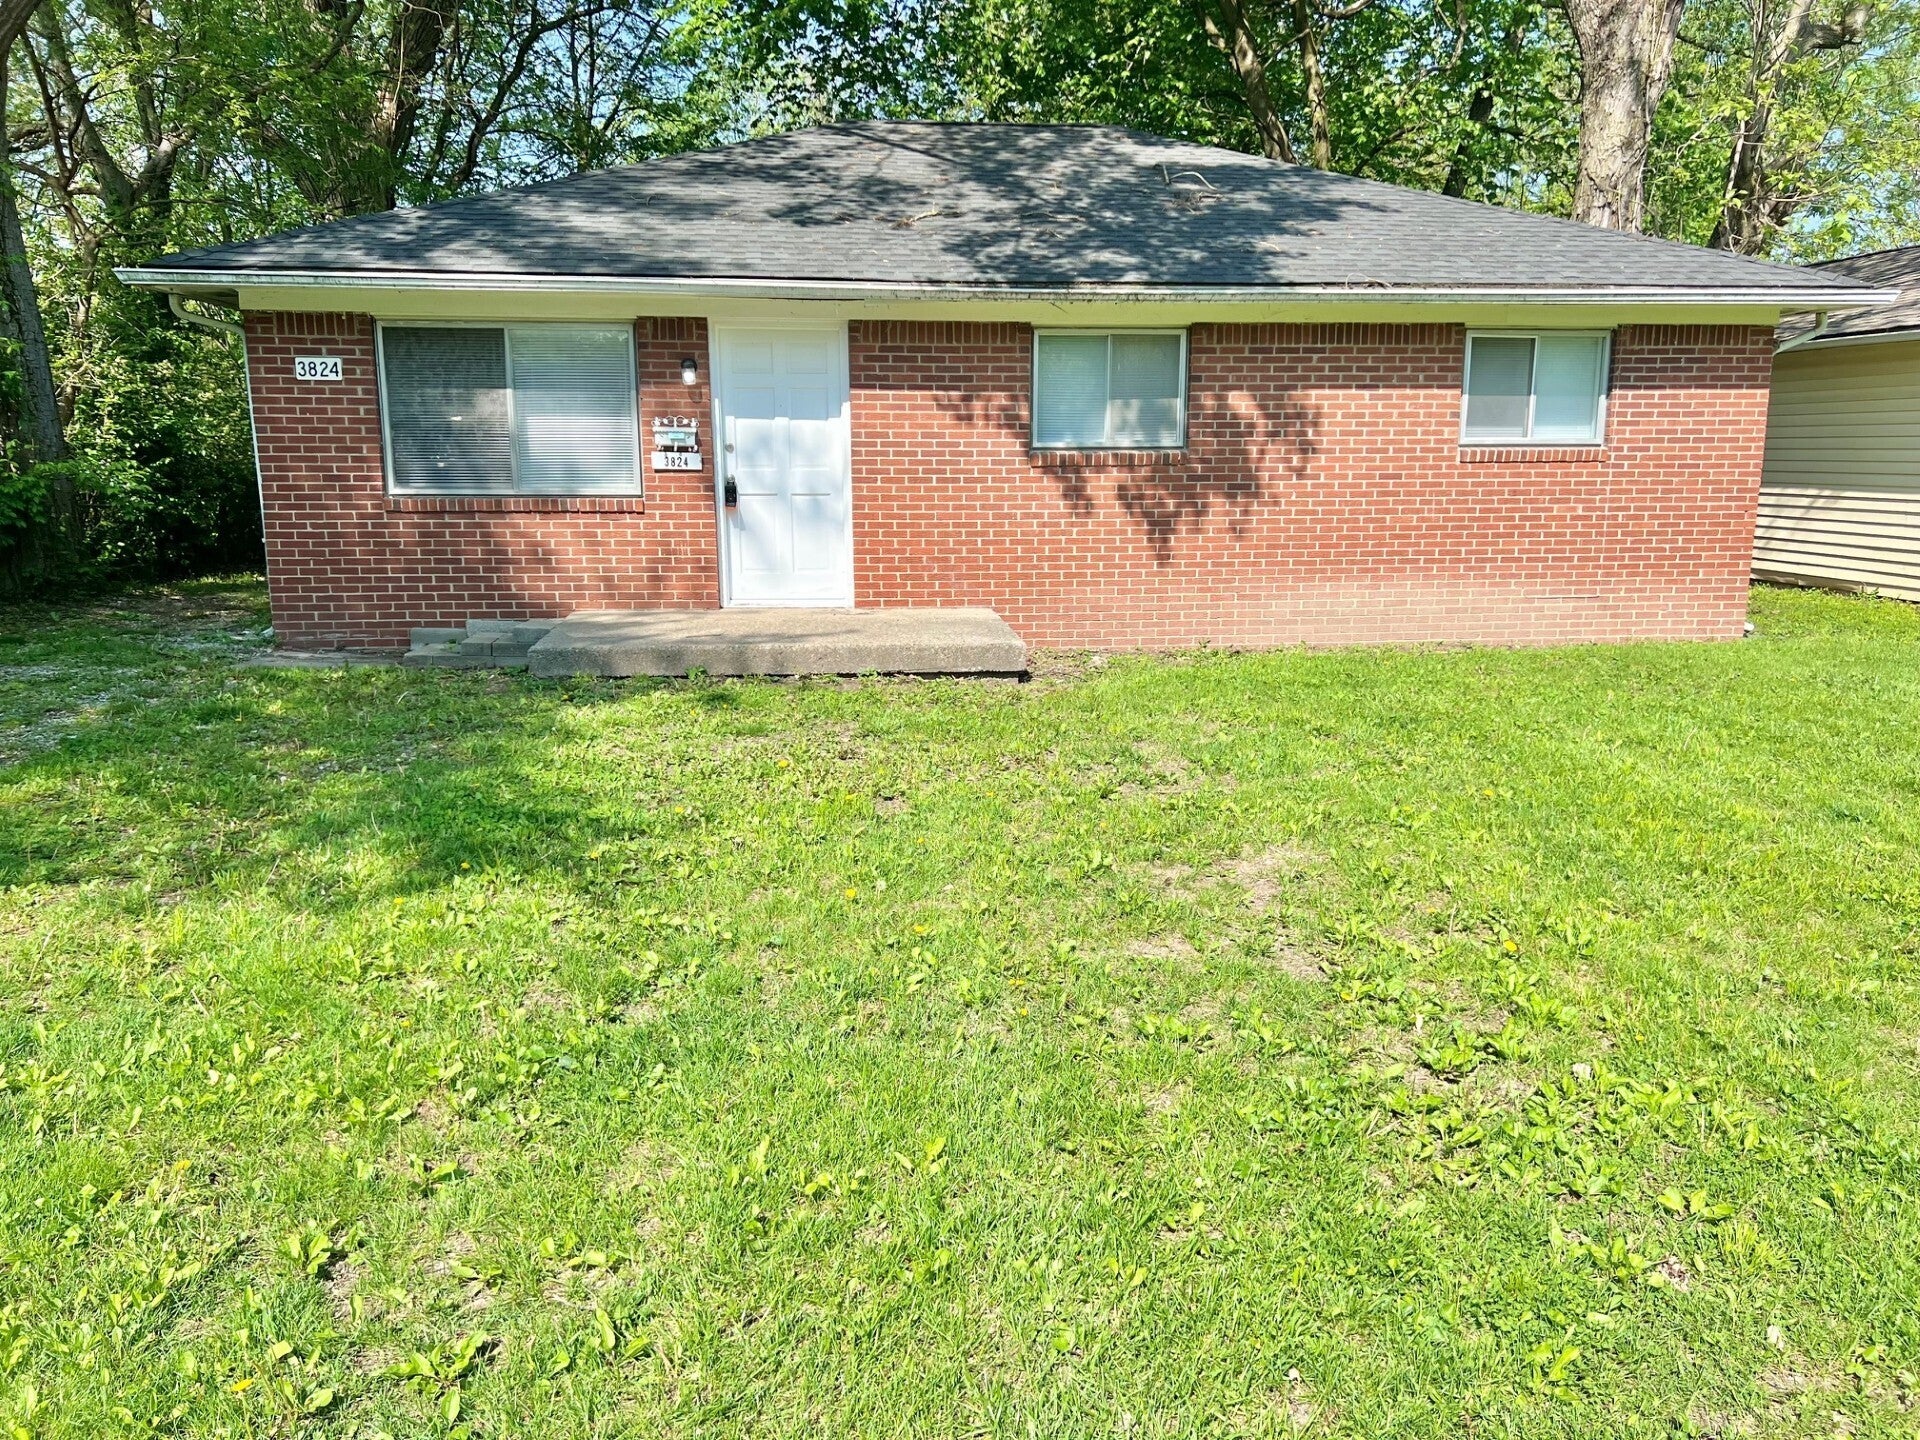 Photo of 3824 N Butler Avenue Indianapolis, IN 46226